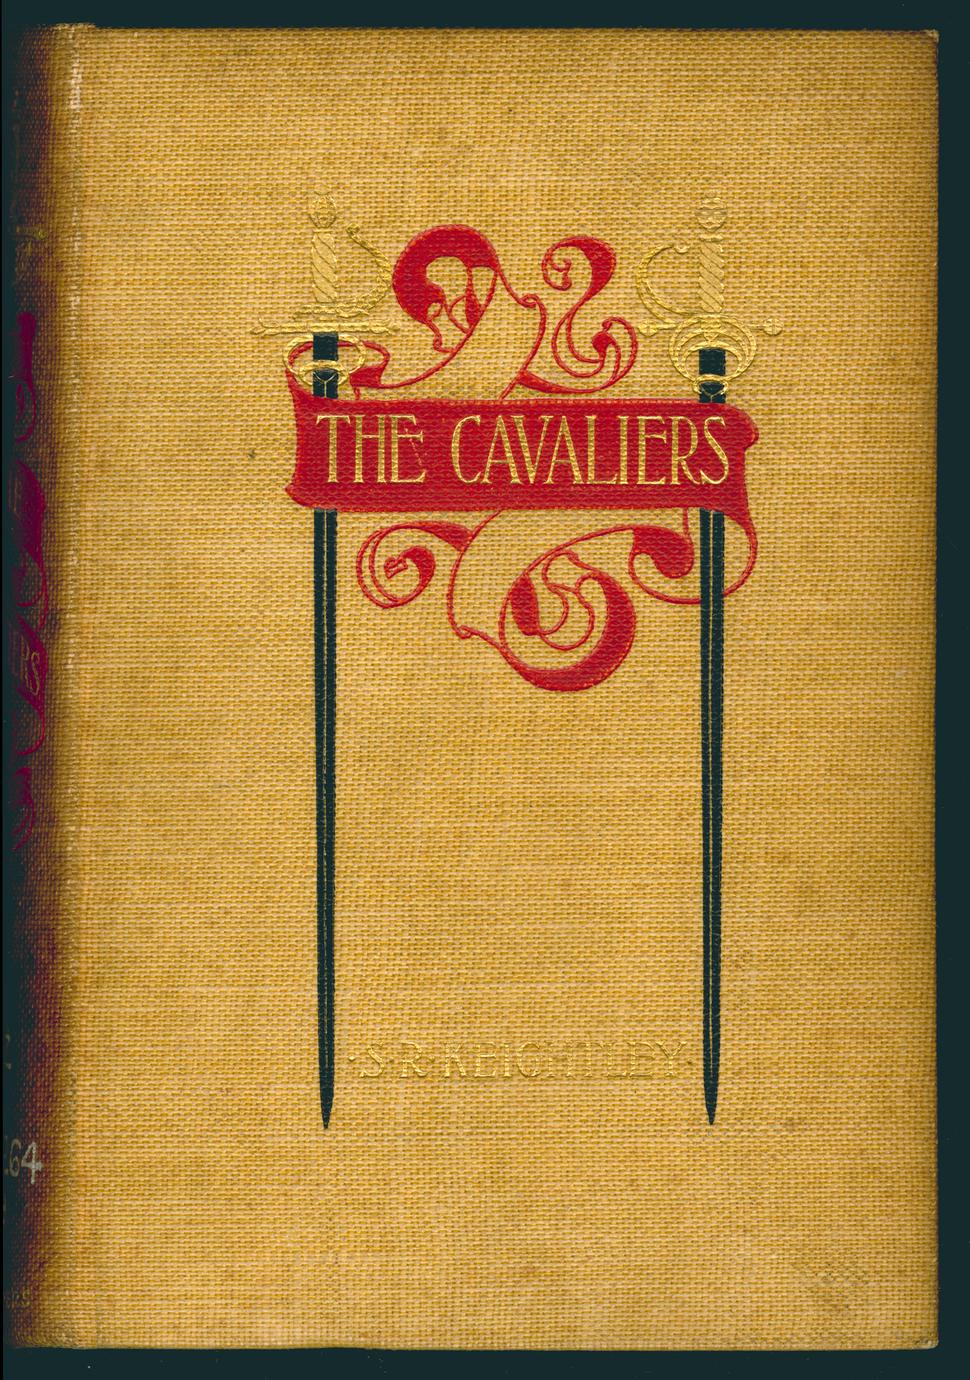 The cavaliers (1 of 2)